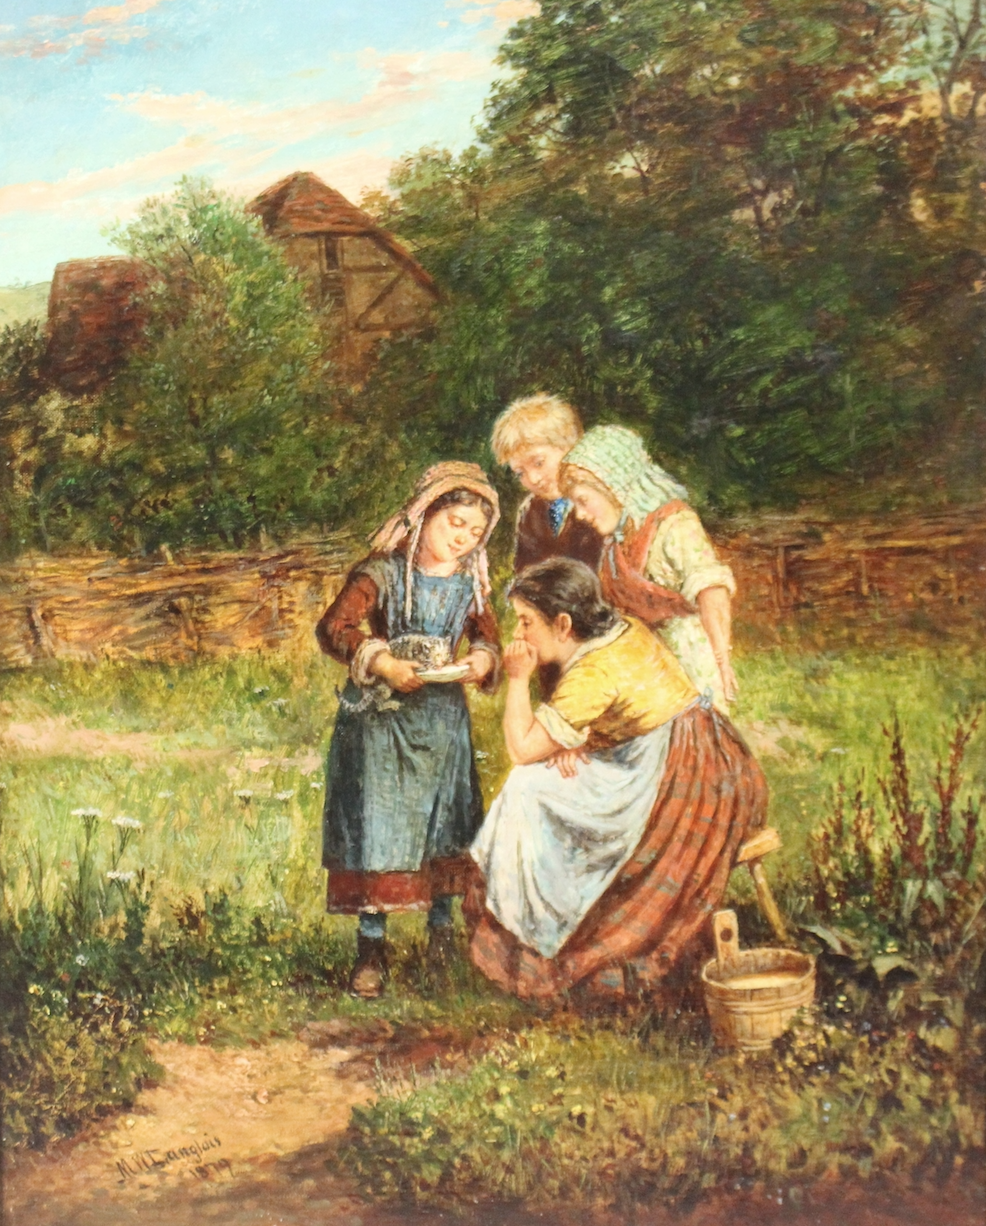 Feeding the Kitten by Mark William Langlois (British, 1848-1924) Oil on Canvas - Image 2 of 8